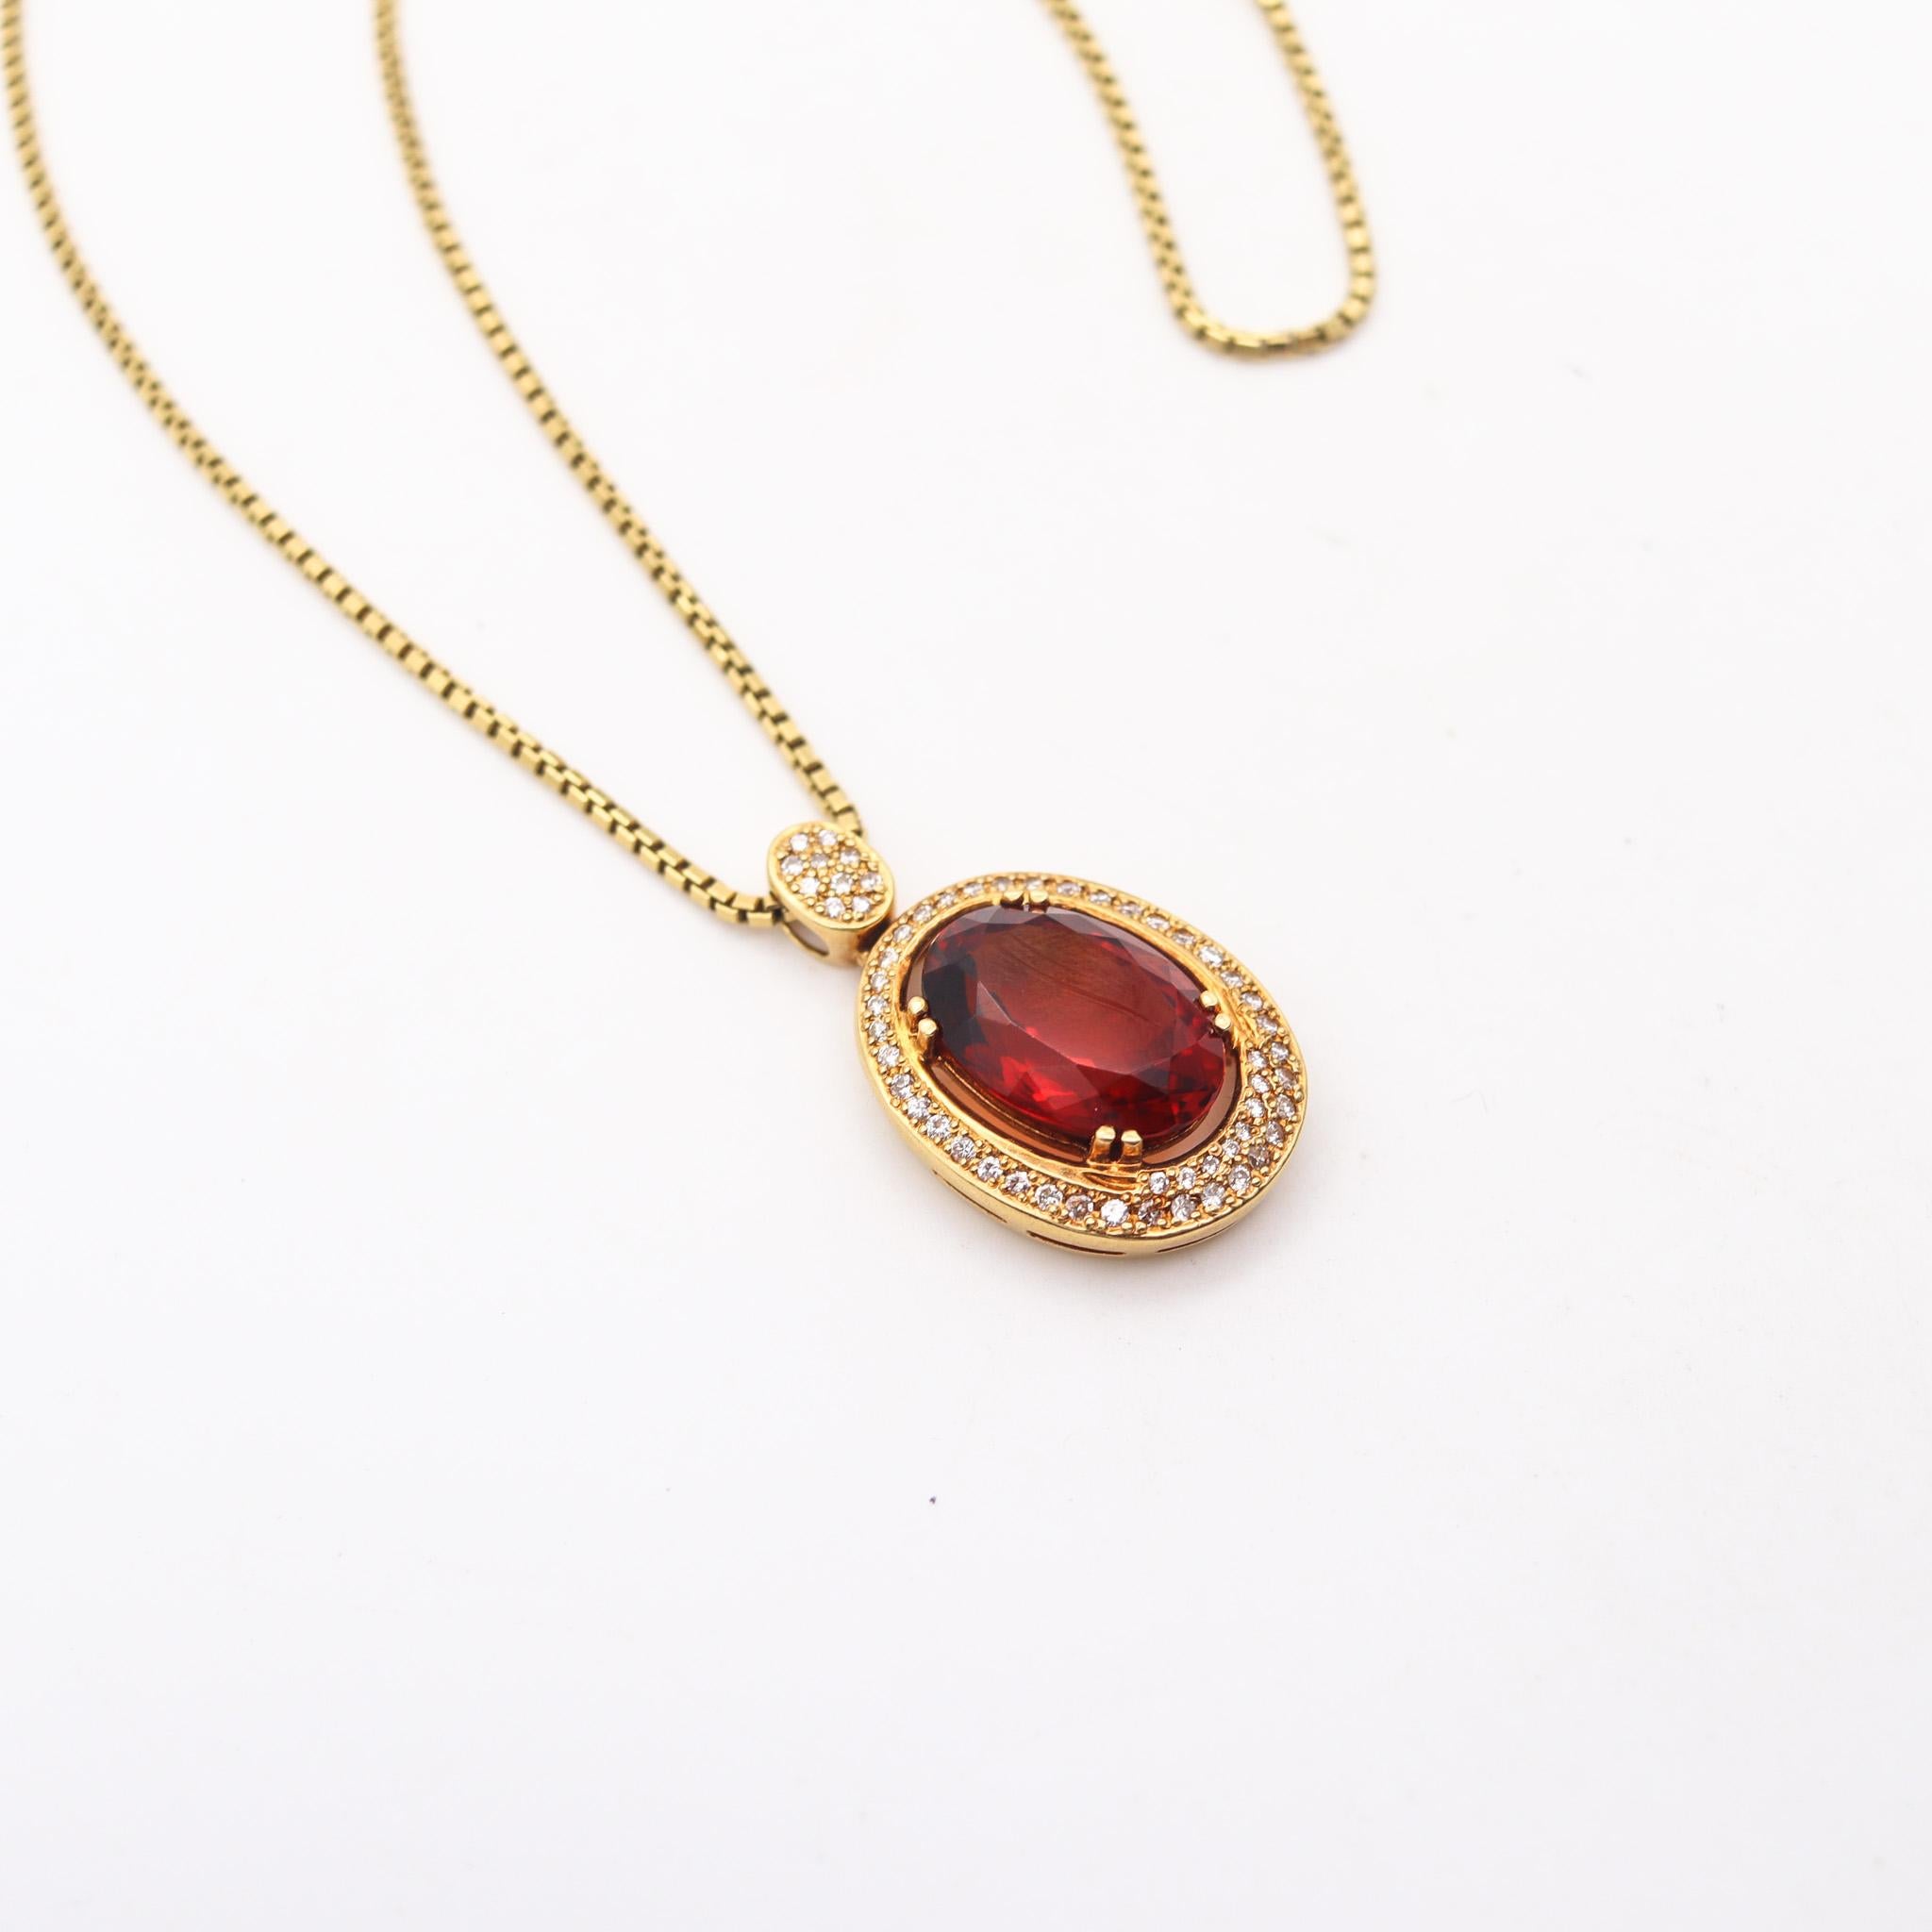 Modernist H Stern Brazil Necklace Pendant In 18Kt Gold With 14.77 Cts In Spinel & Diamonds For Sale